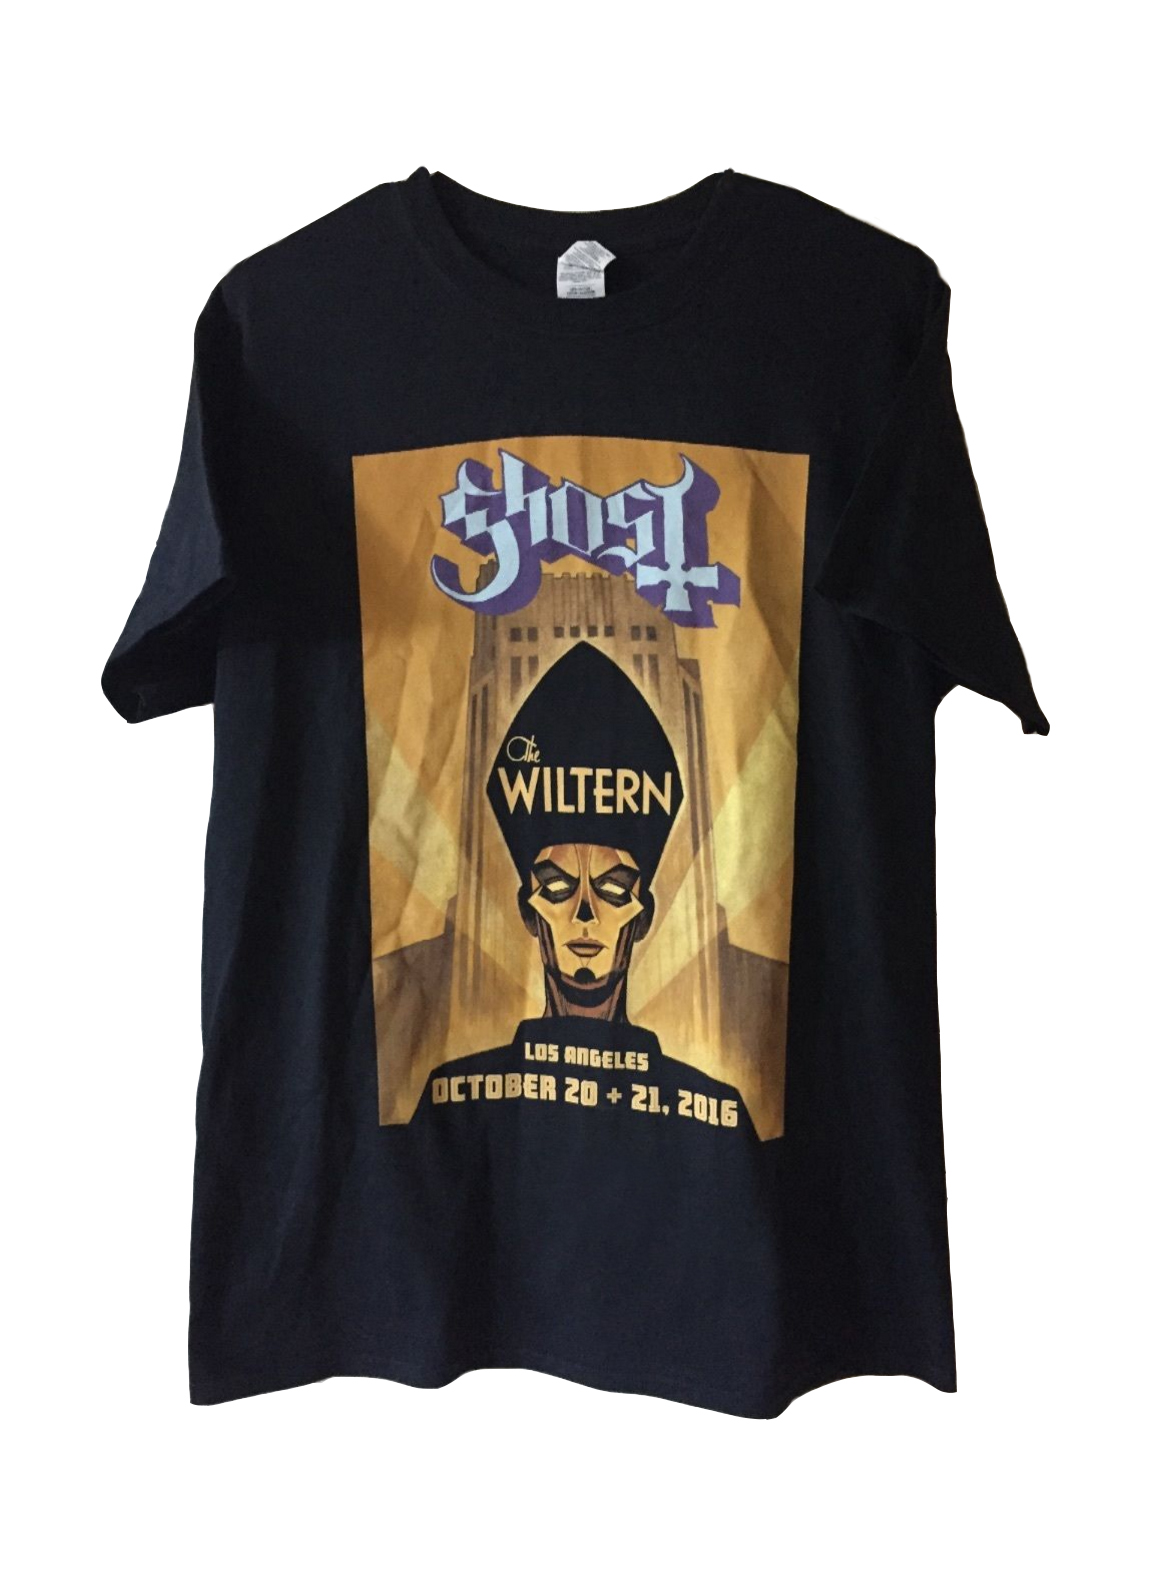   GHOST | The Popestar Tour 2016    Official limited edition 'The Wiltern' t-shirt    Acrylic on paper and digital  